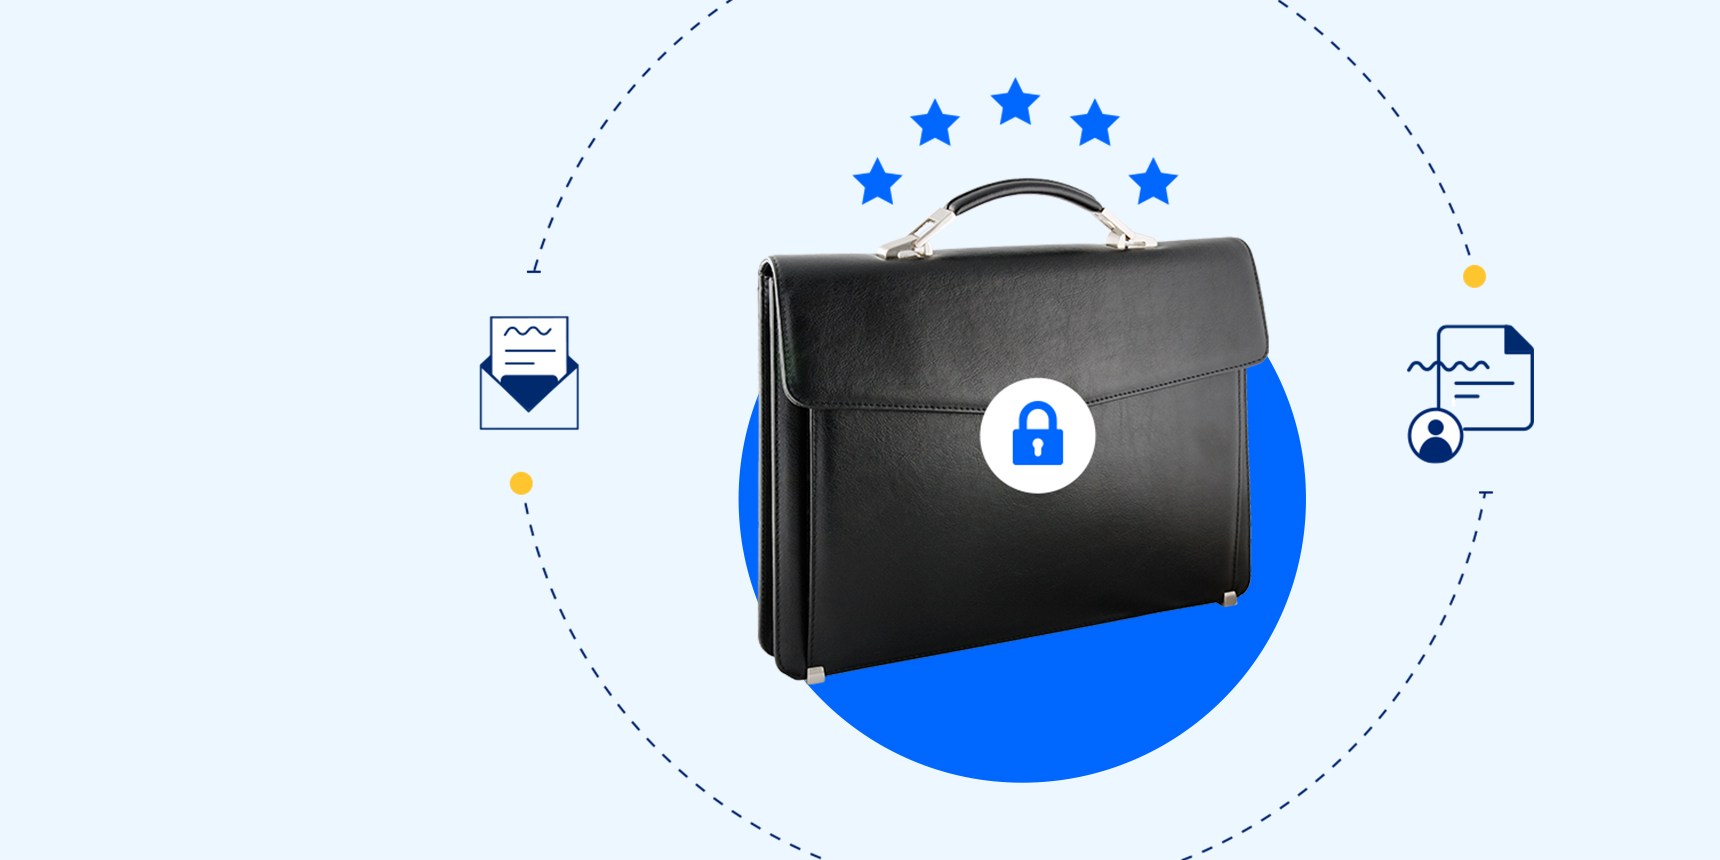 Image of a briefcase with a lock icon on it